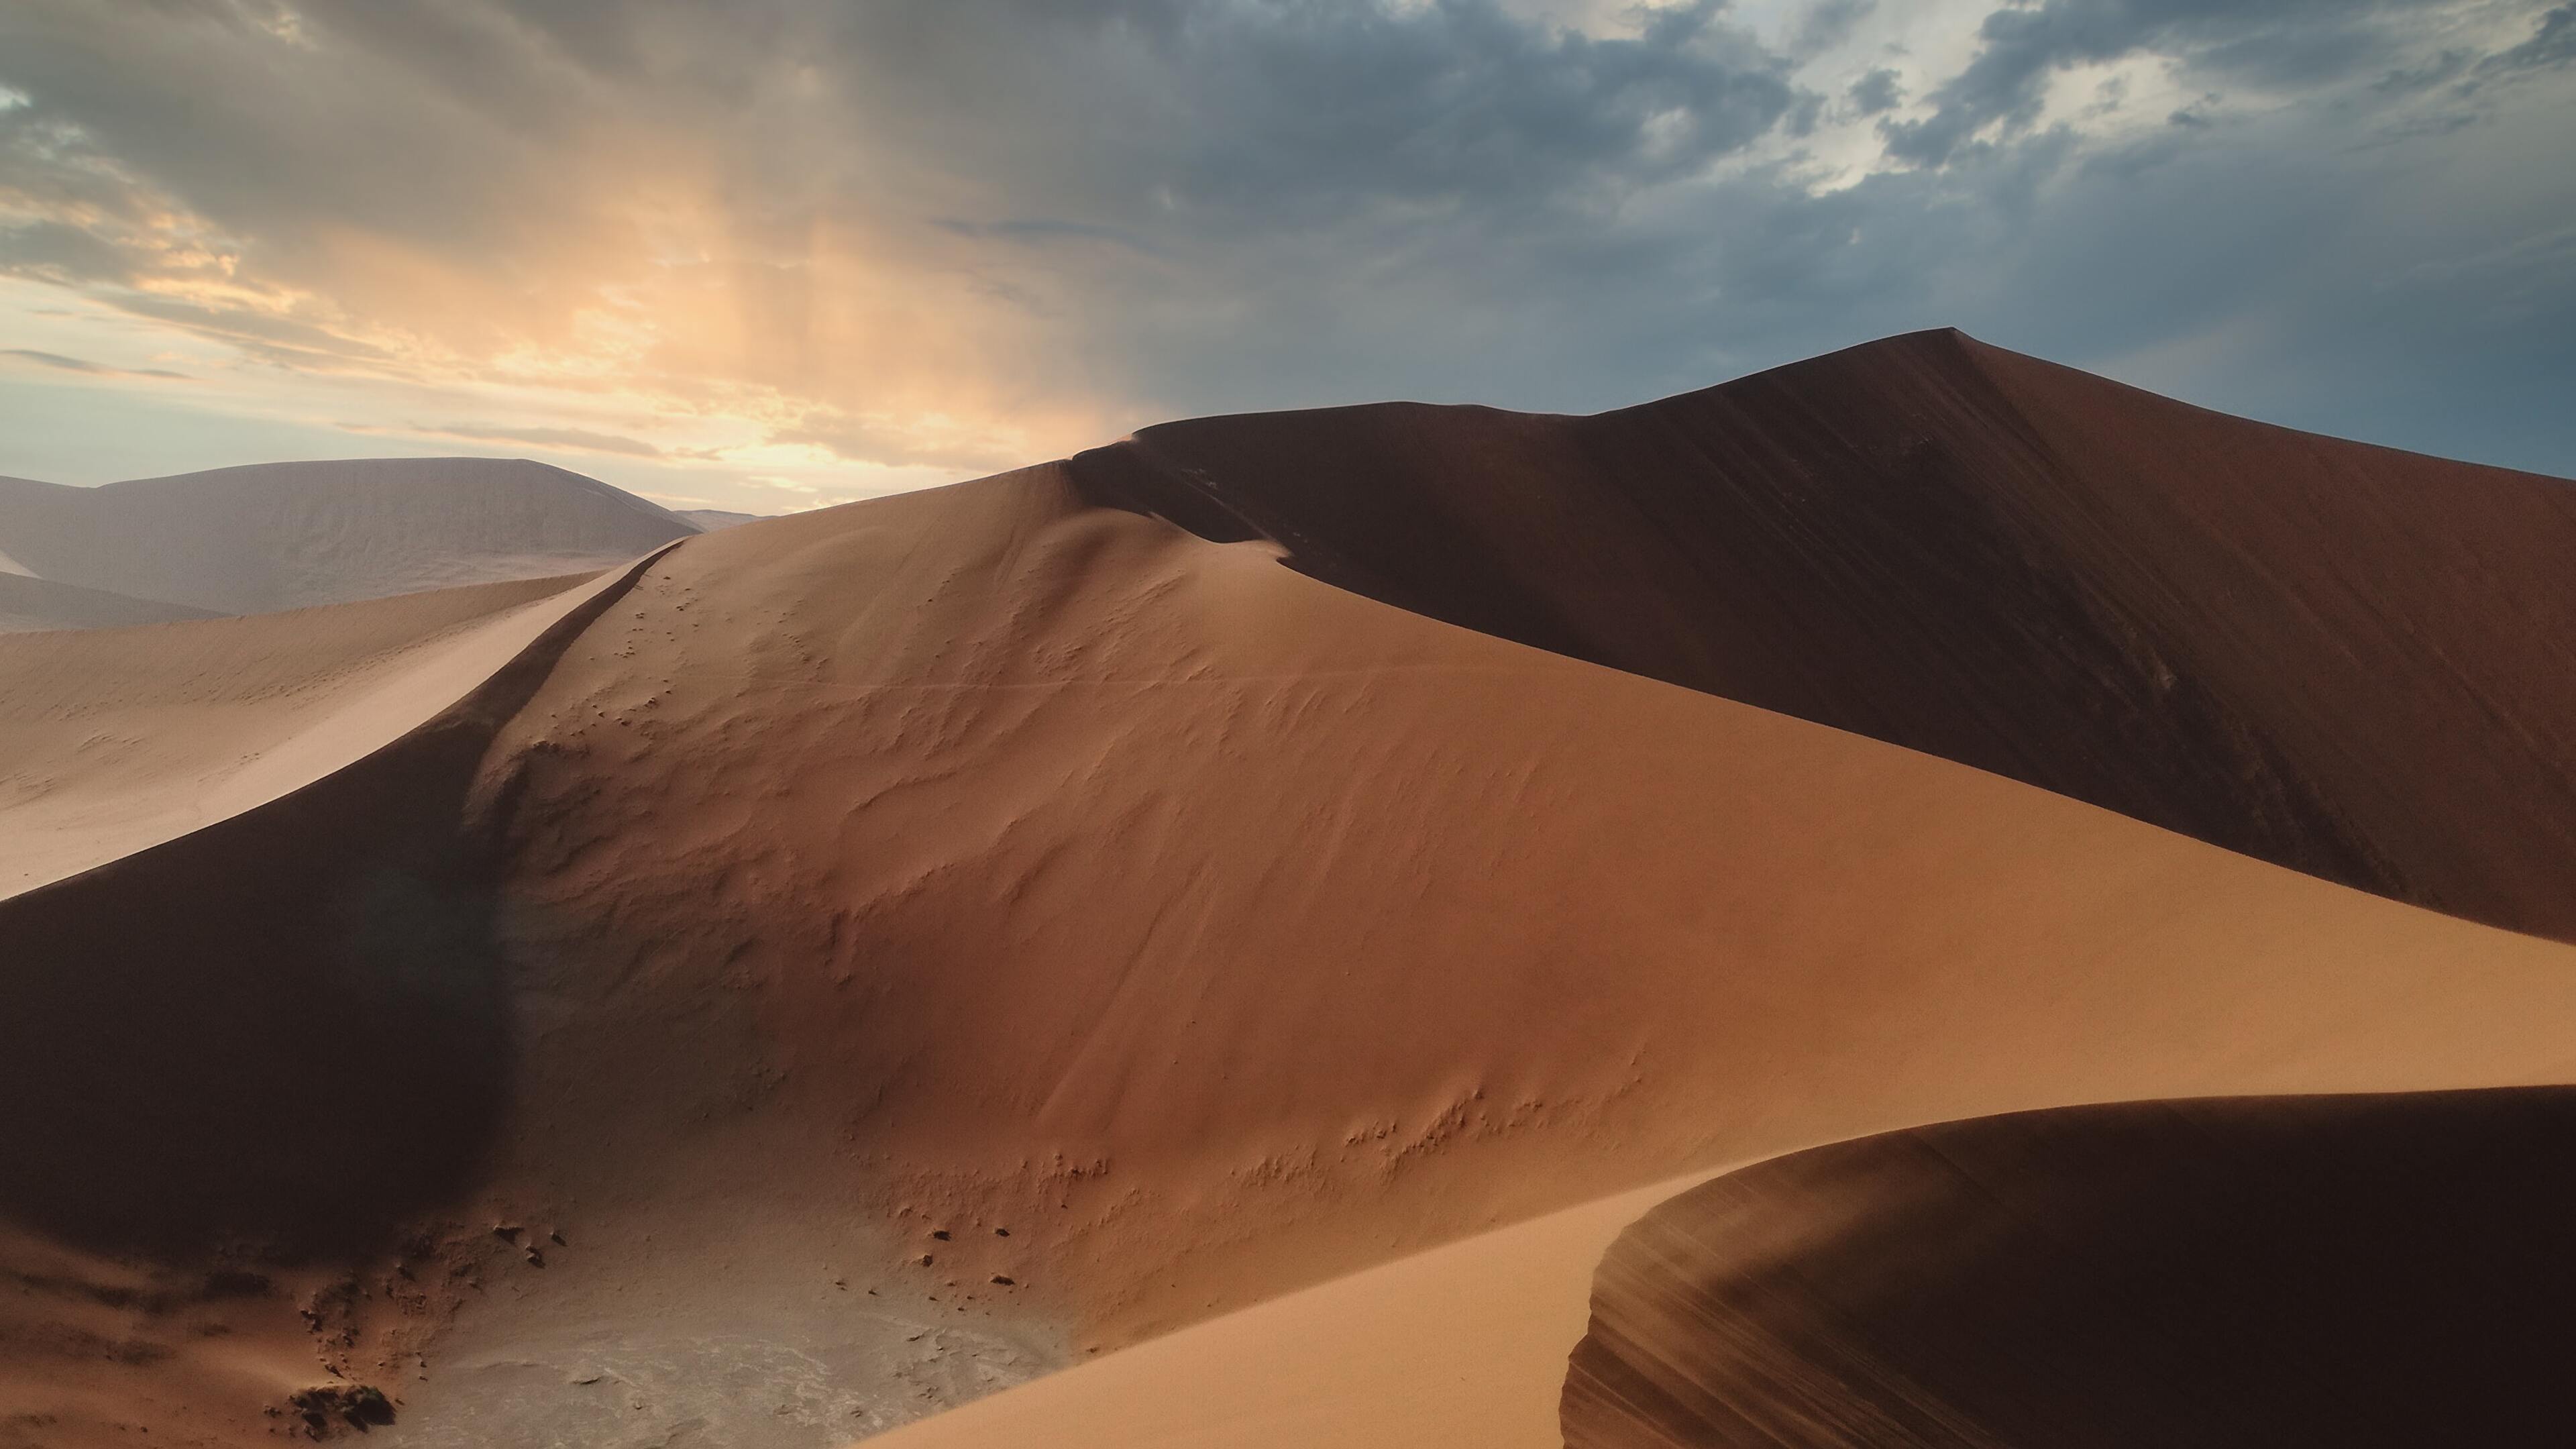 Dunes 4K wallpaper for your desktop or mobile screen free and easy to download